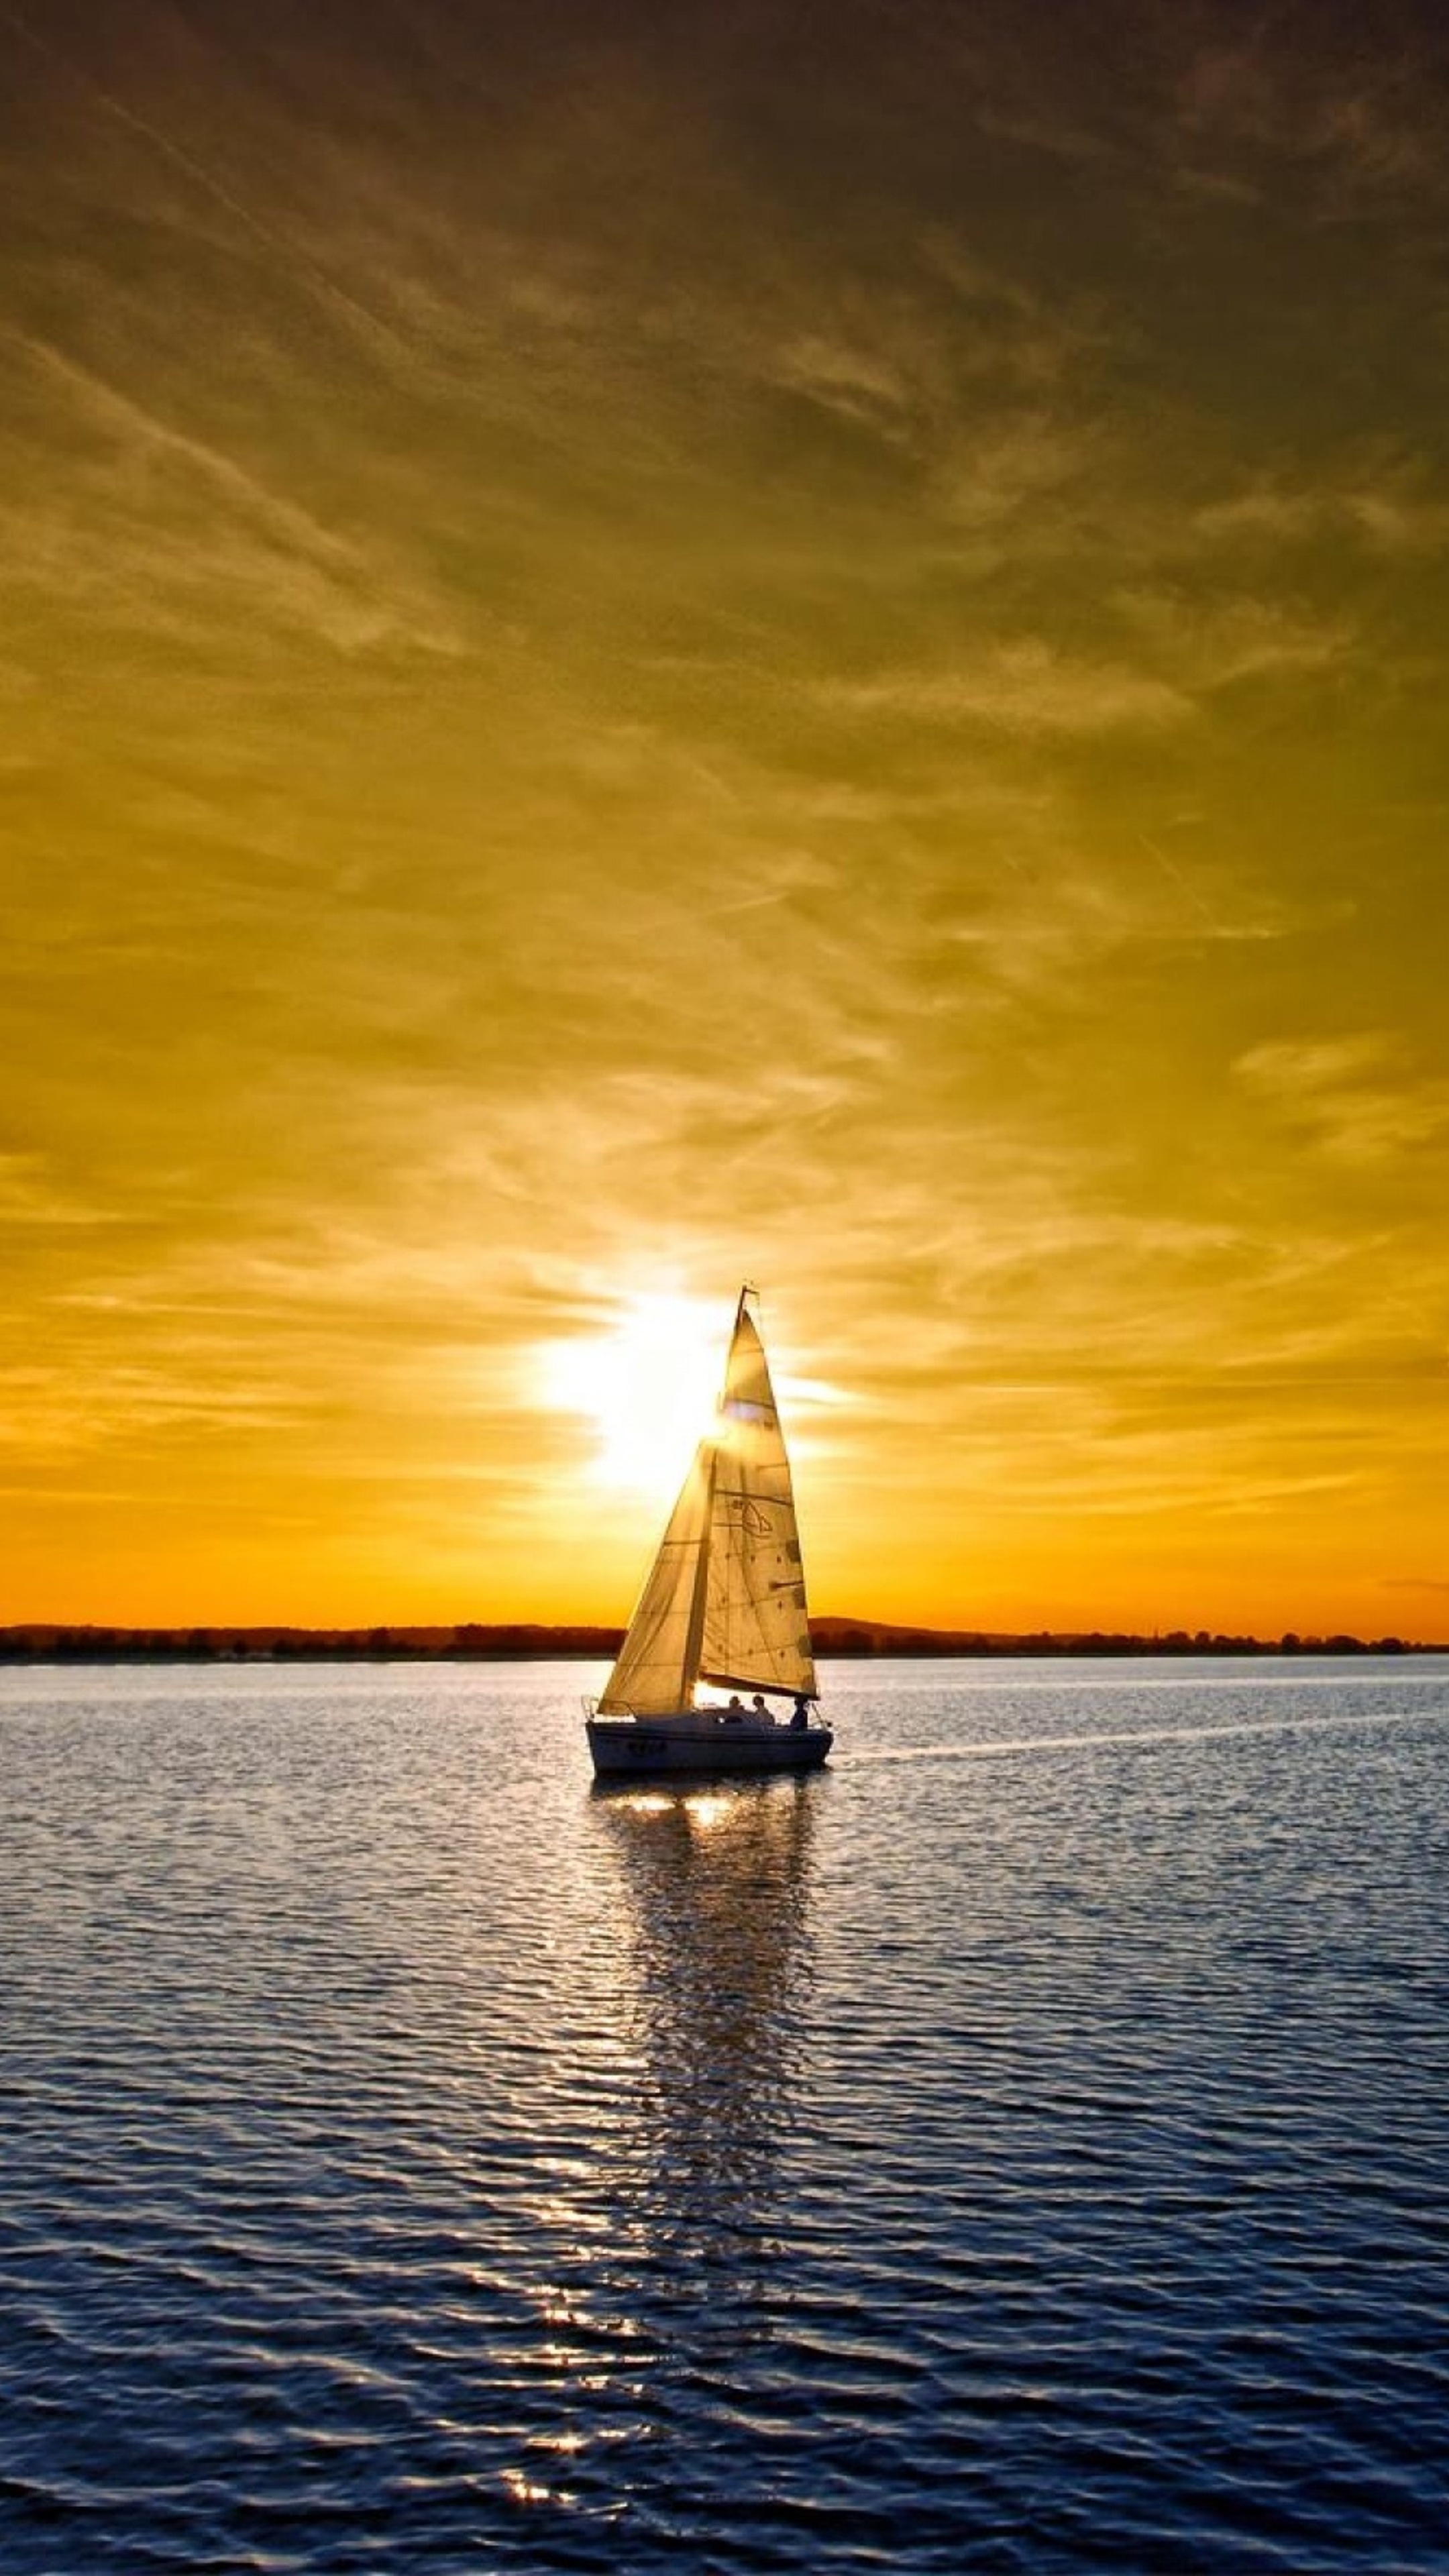 Sailing: Boat, Sunset, Landscape, A sport of overcoming the distance on the water. 2160x3840 4K Background.